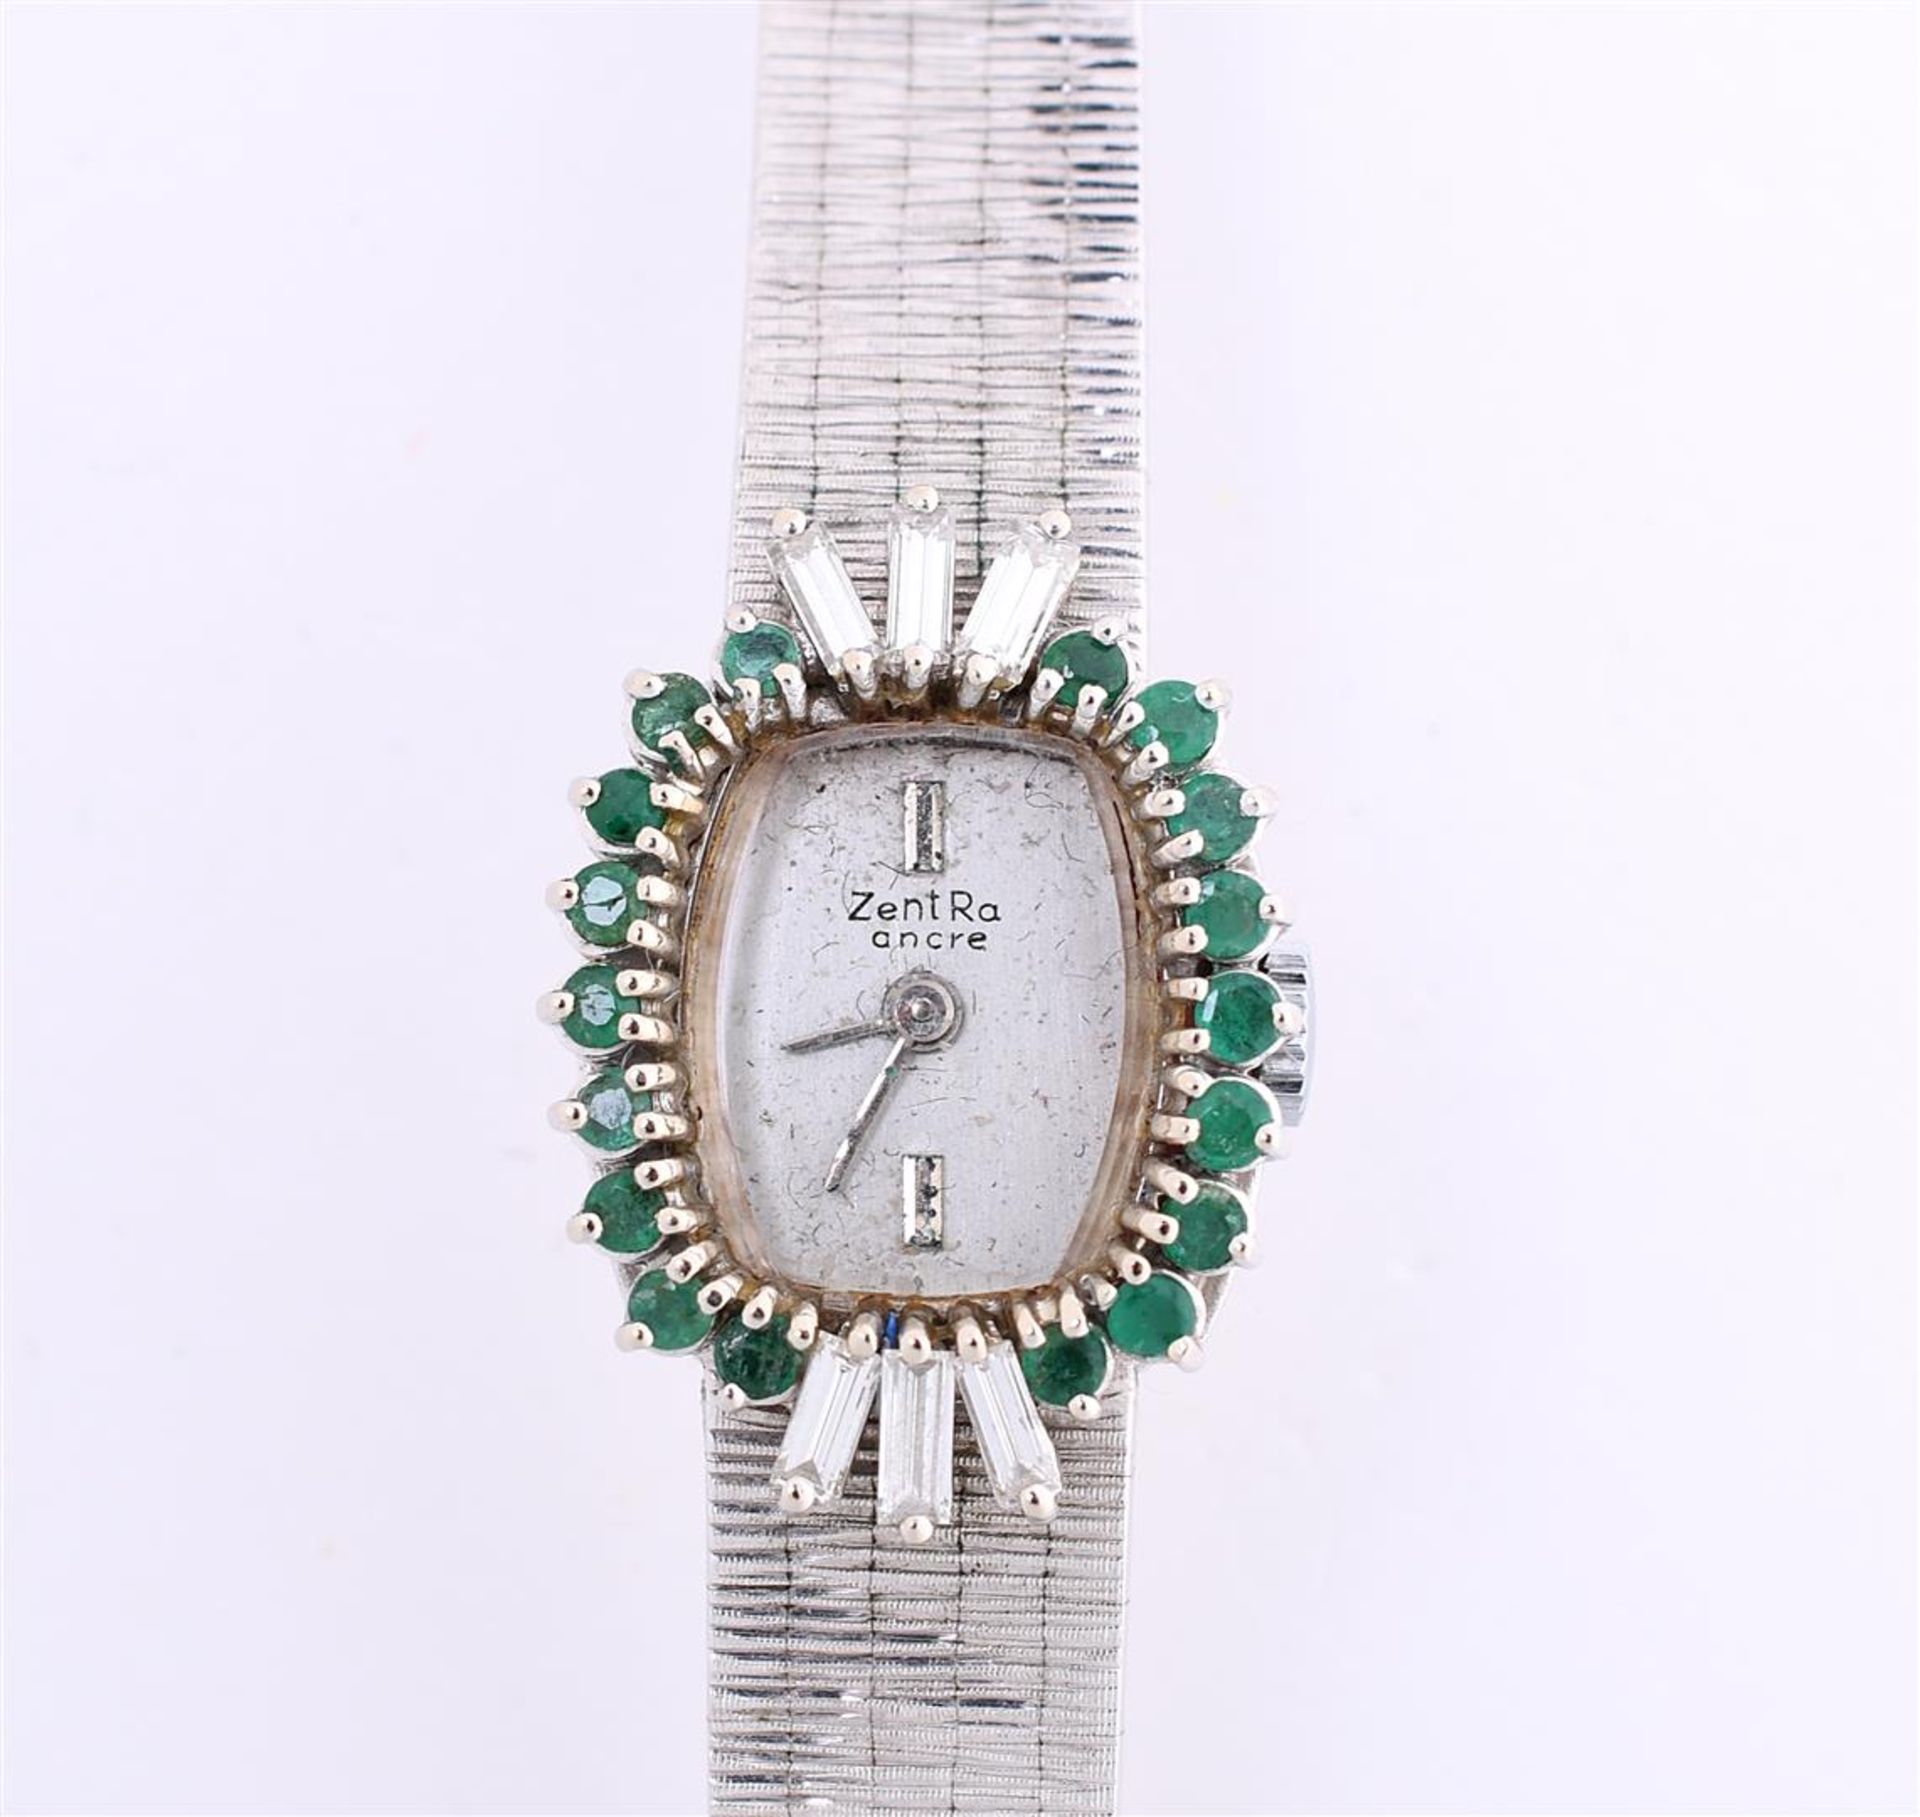 18 carat ladies wristwatch, the strap is a solid solid link with a staircase clasp